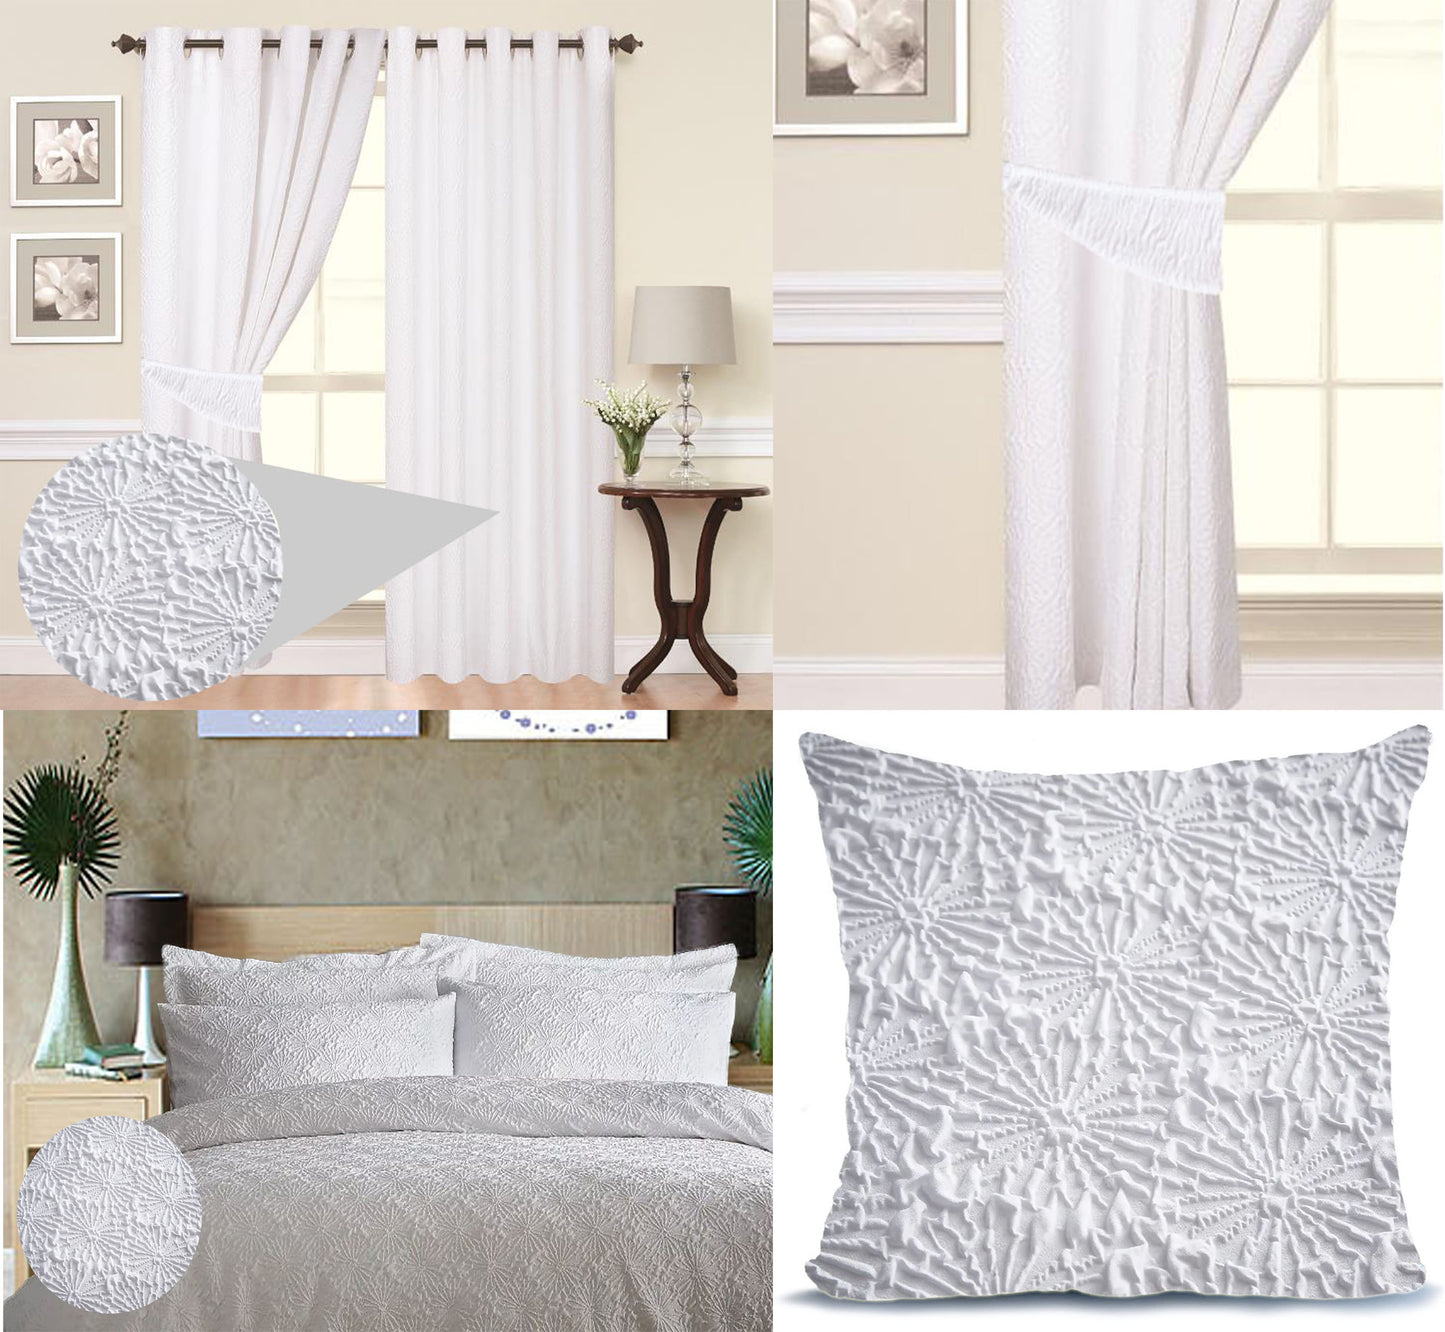 Embossed Duvet Cover Set Curtains Cushions Matching Astra White Floral Non Iron